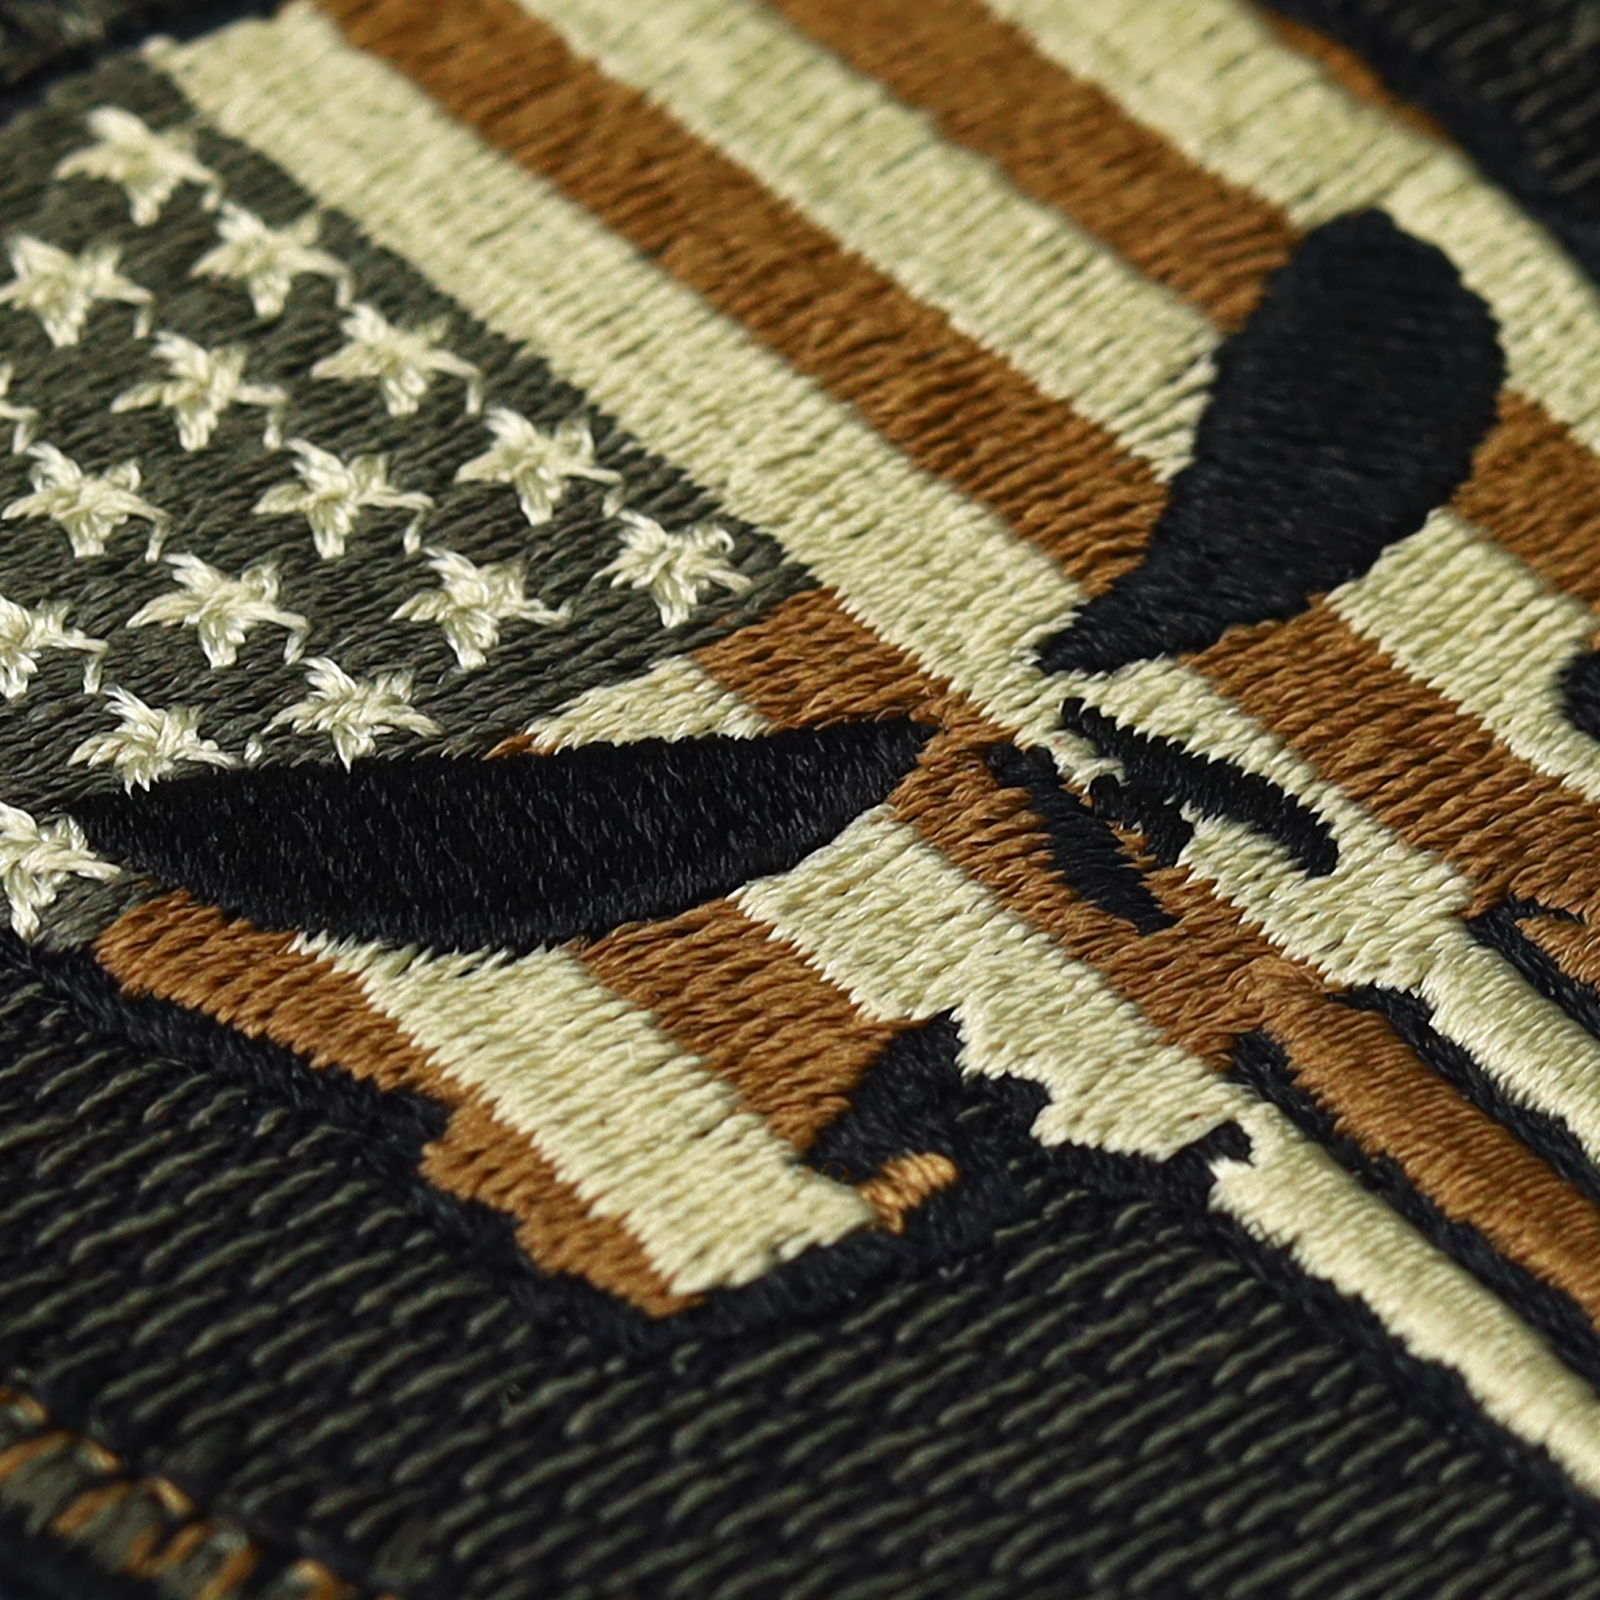 US Army Punisher - Patch